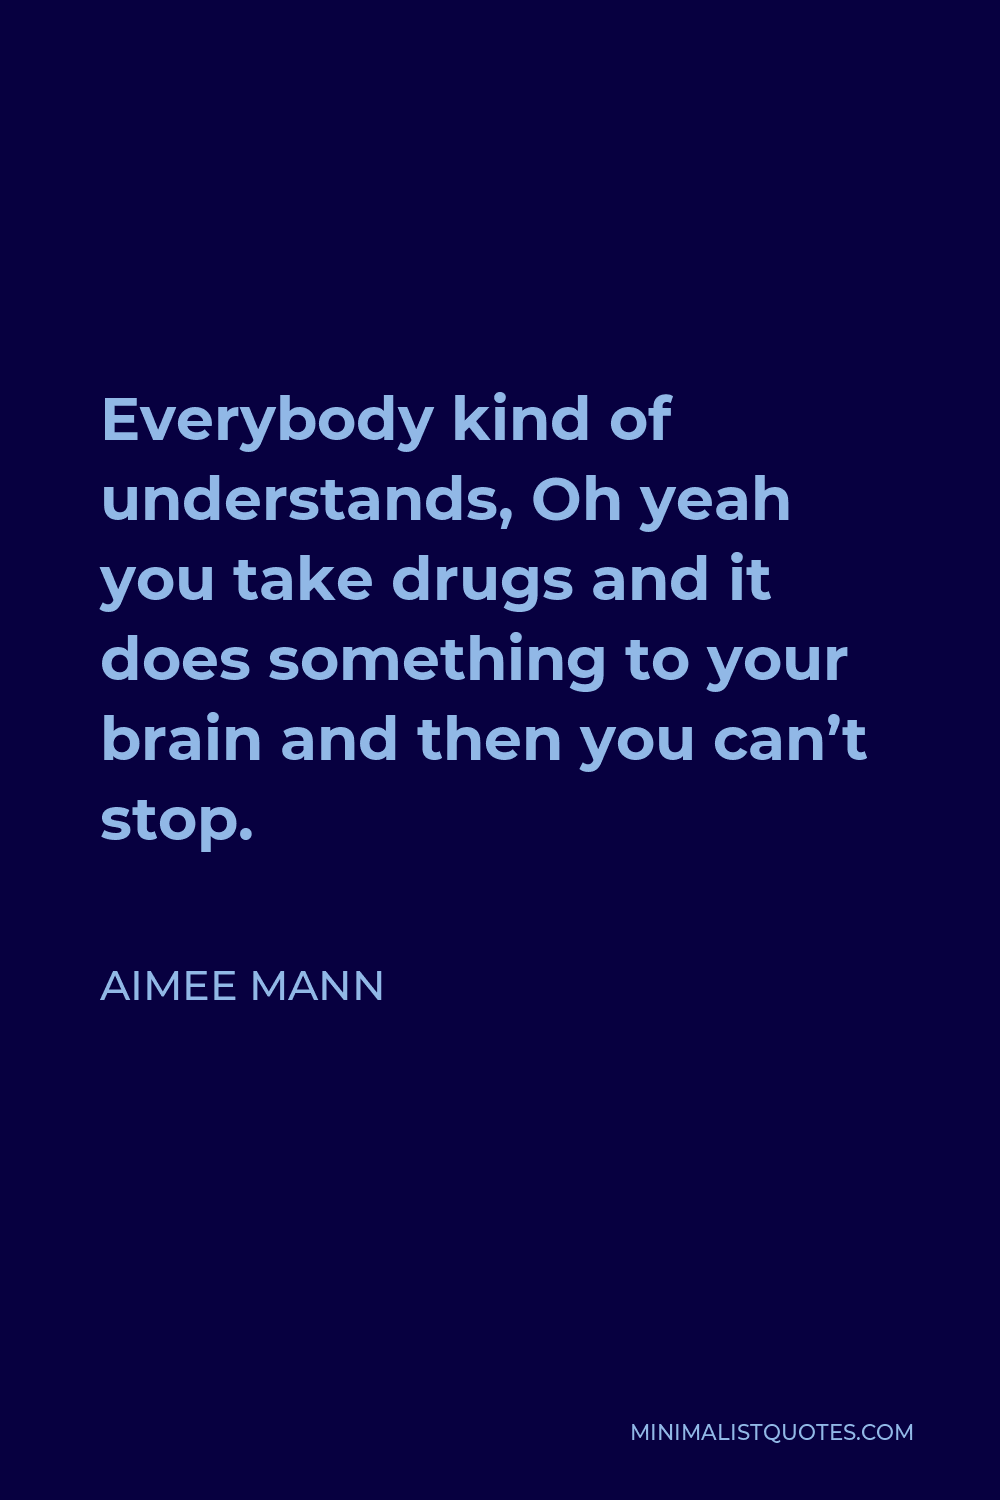 Aimee Mann Quote - Everybody kind of understands, Oh yeah you take drugs and it does something to your brain and then you can’t stop.